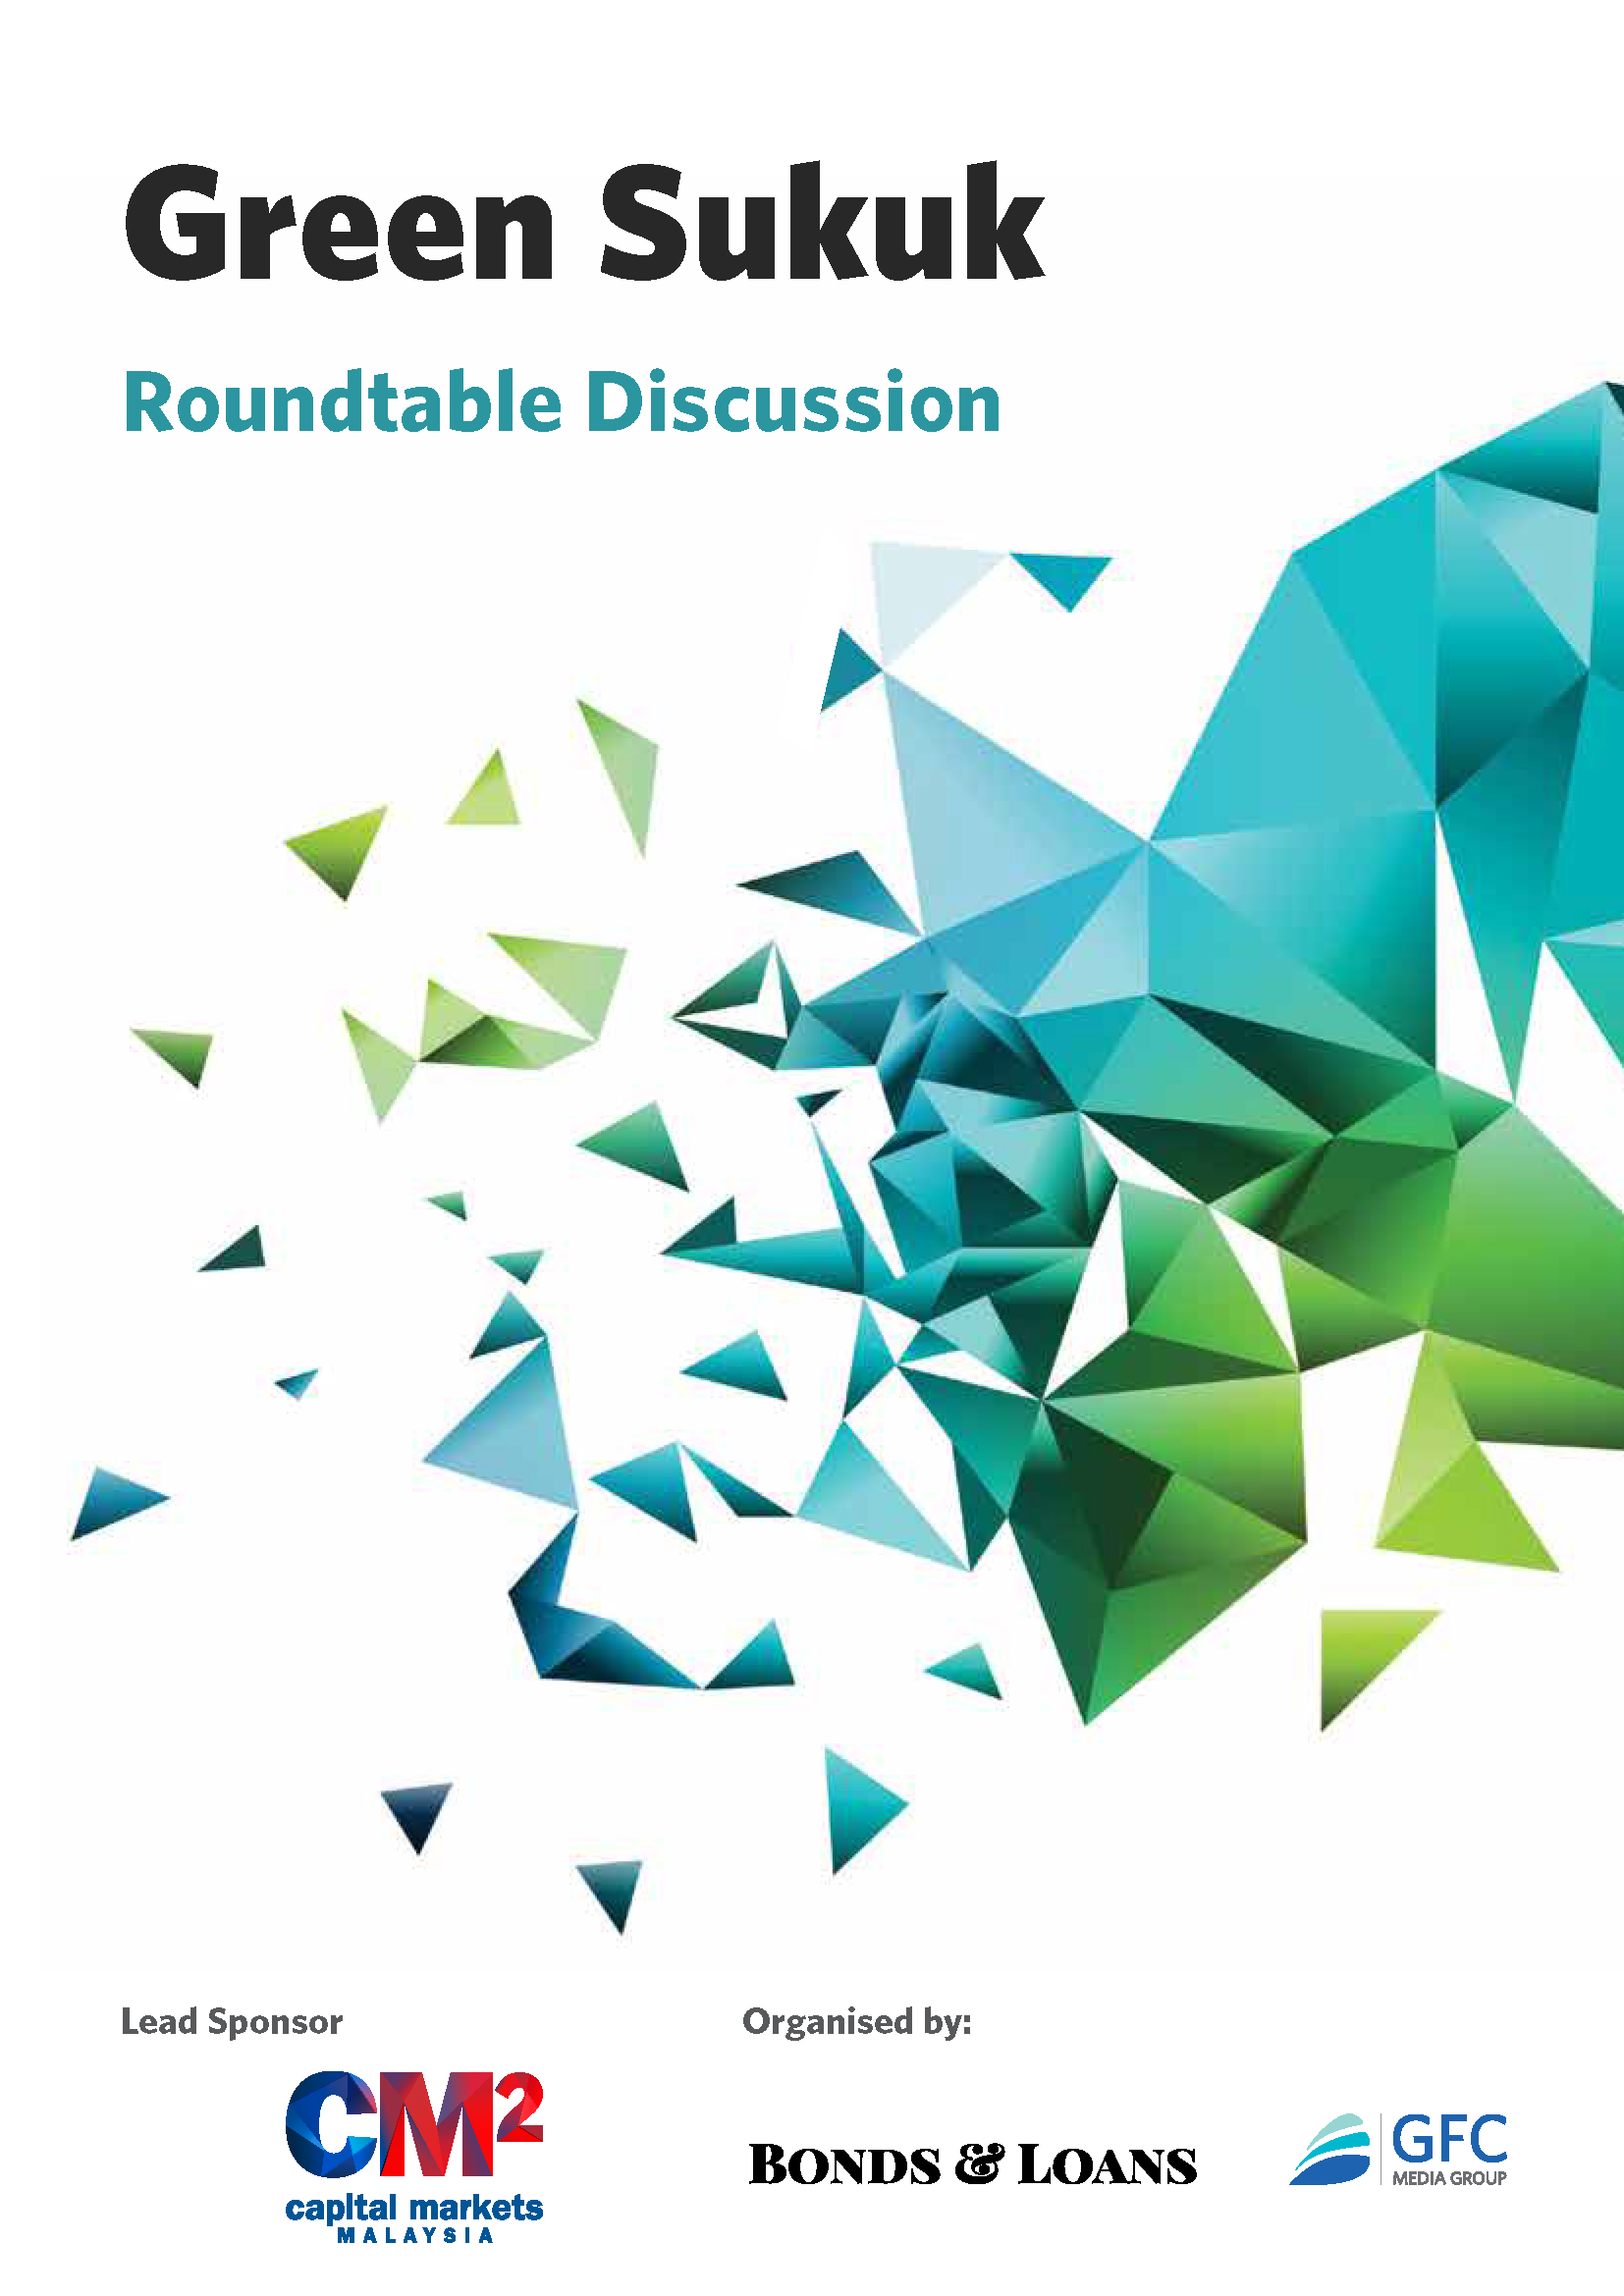 Green Sukuk Roundtable Discussion